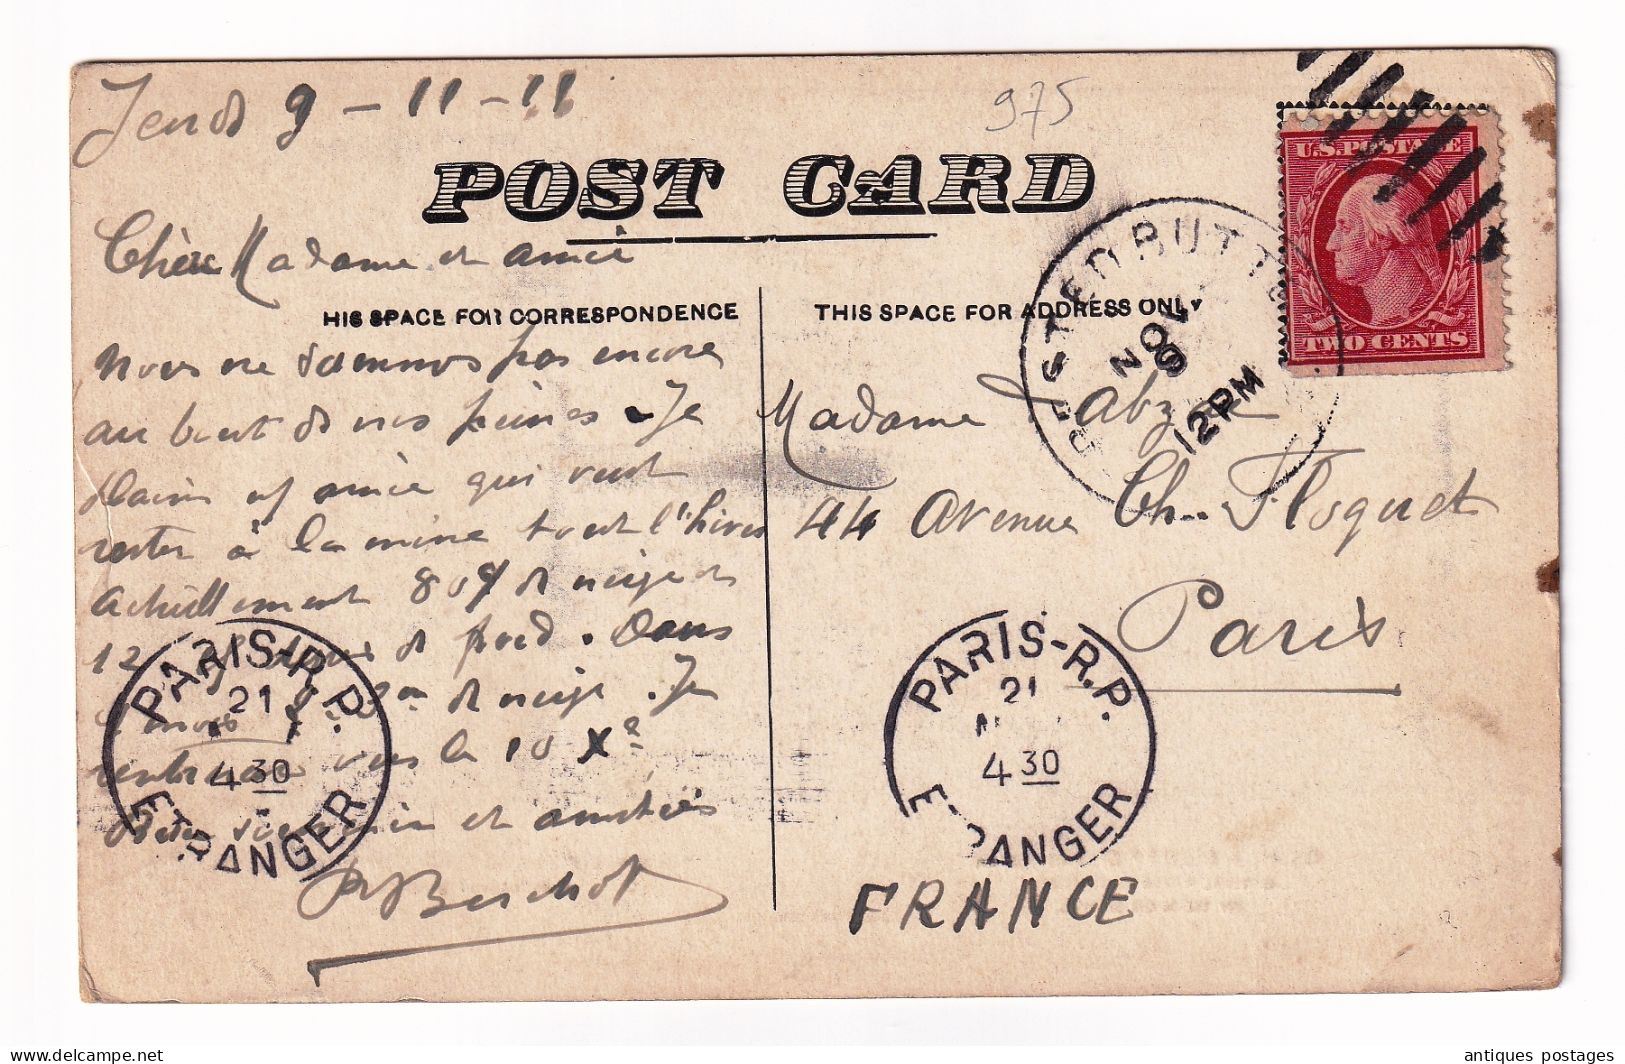 Post Card 1911 Crested Butte Colorado Elk Mountain House Hubbard USA Paris France Two Cents Red Washington - Covers & Documents